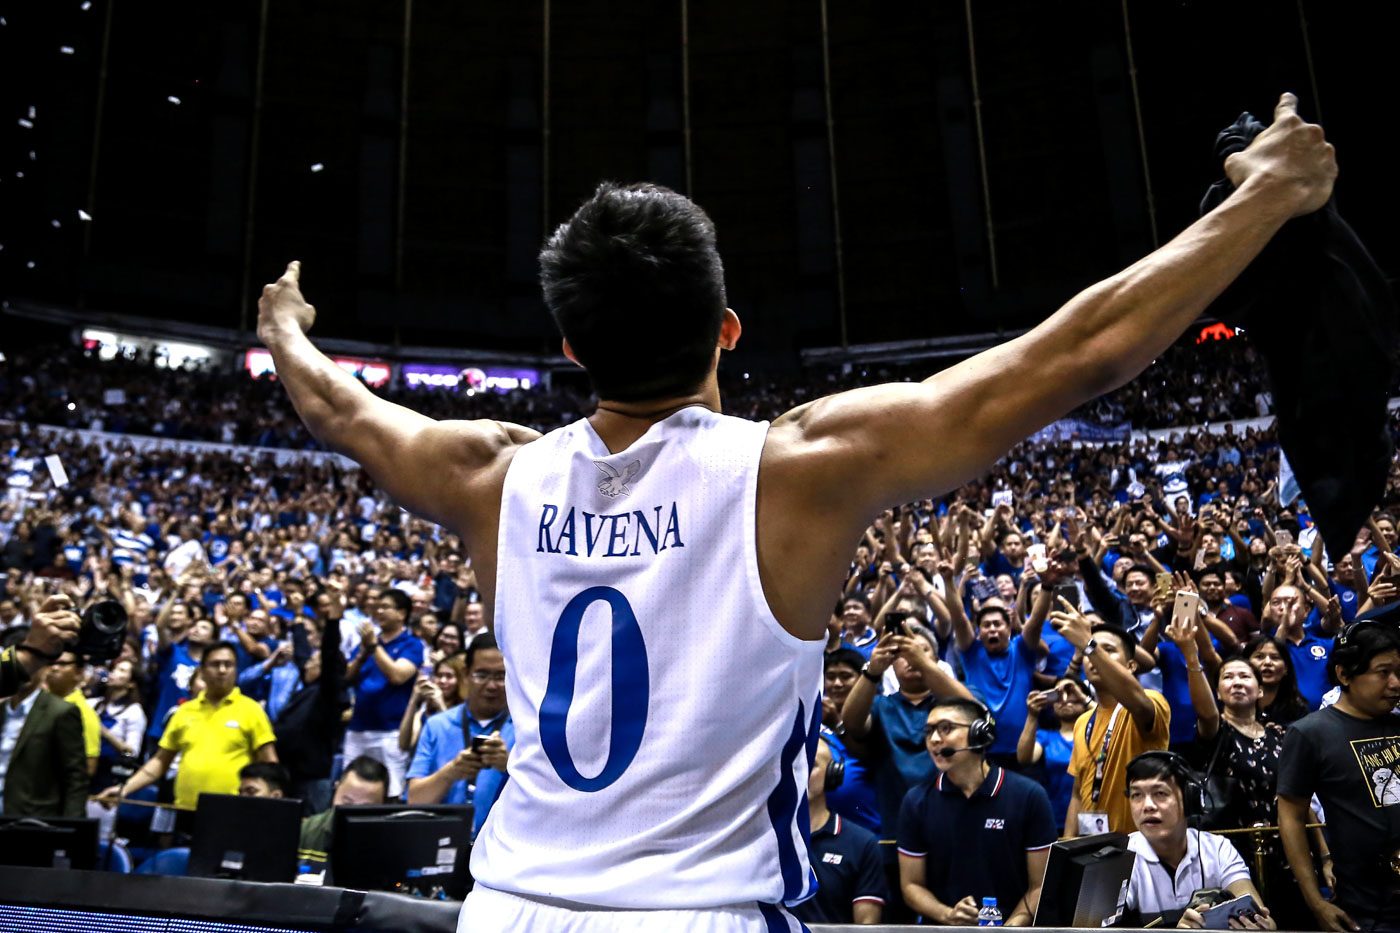 SERIES HERO. Thirdy Ravena basks in the cheers of the Ateneo faithful after a phenomenal series performance. Photo by Michael Gatpandan/Rappler   